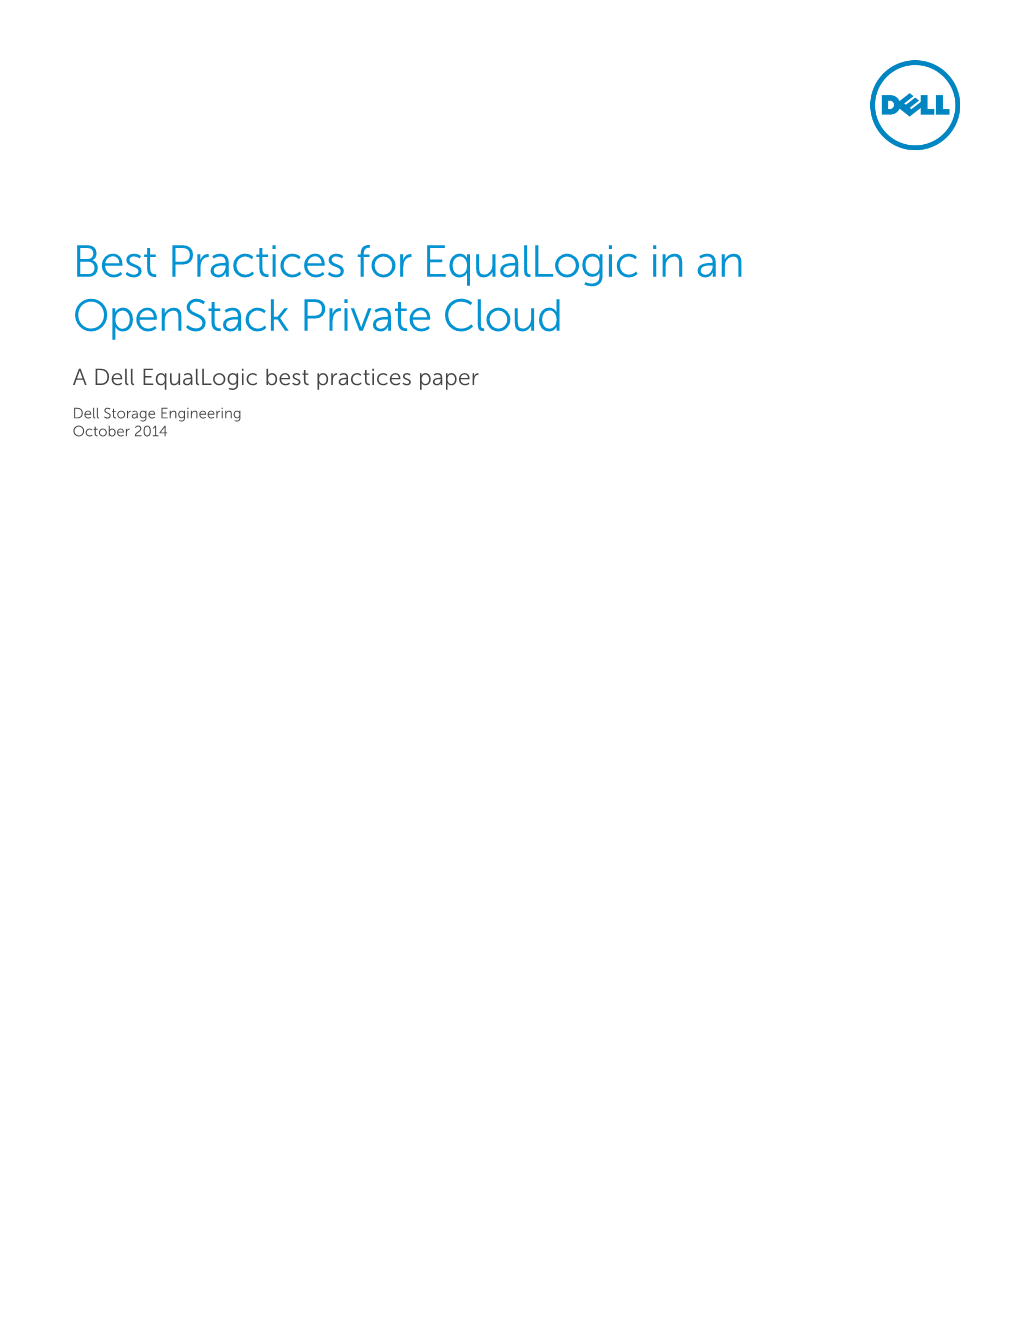 Best Practices for Equallogic in an Openstack Private Cloud